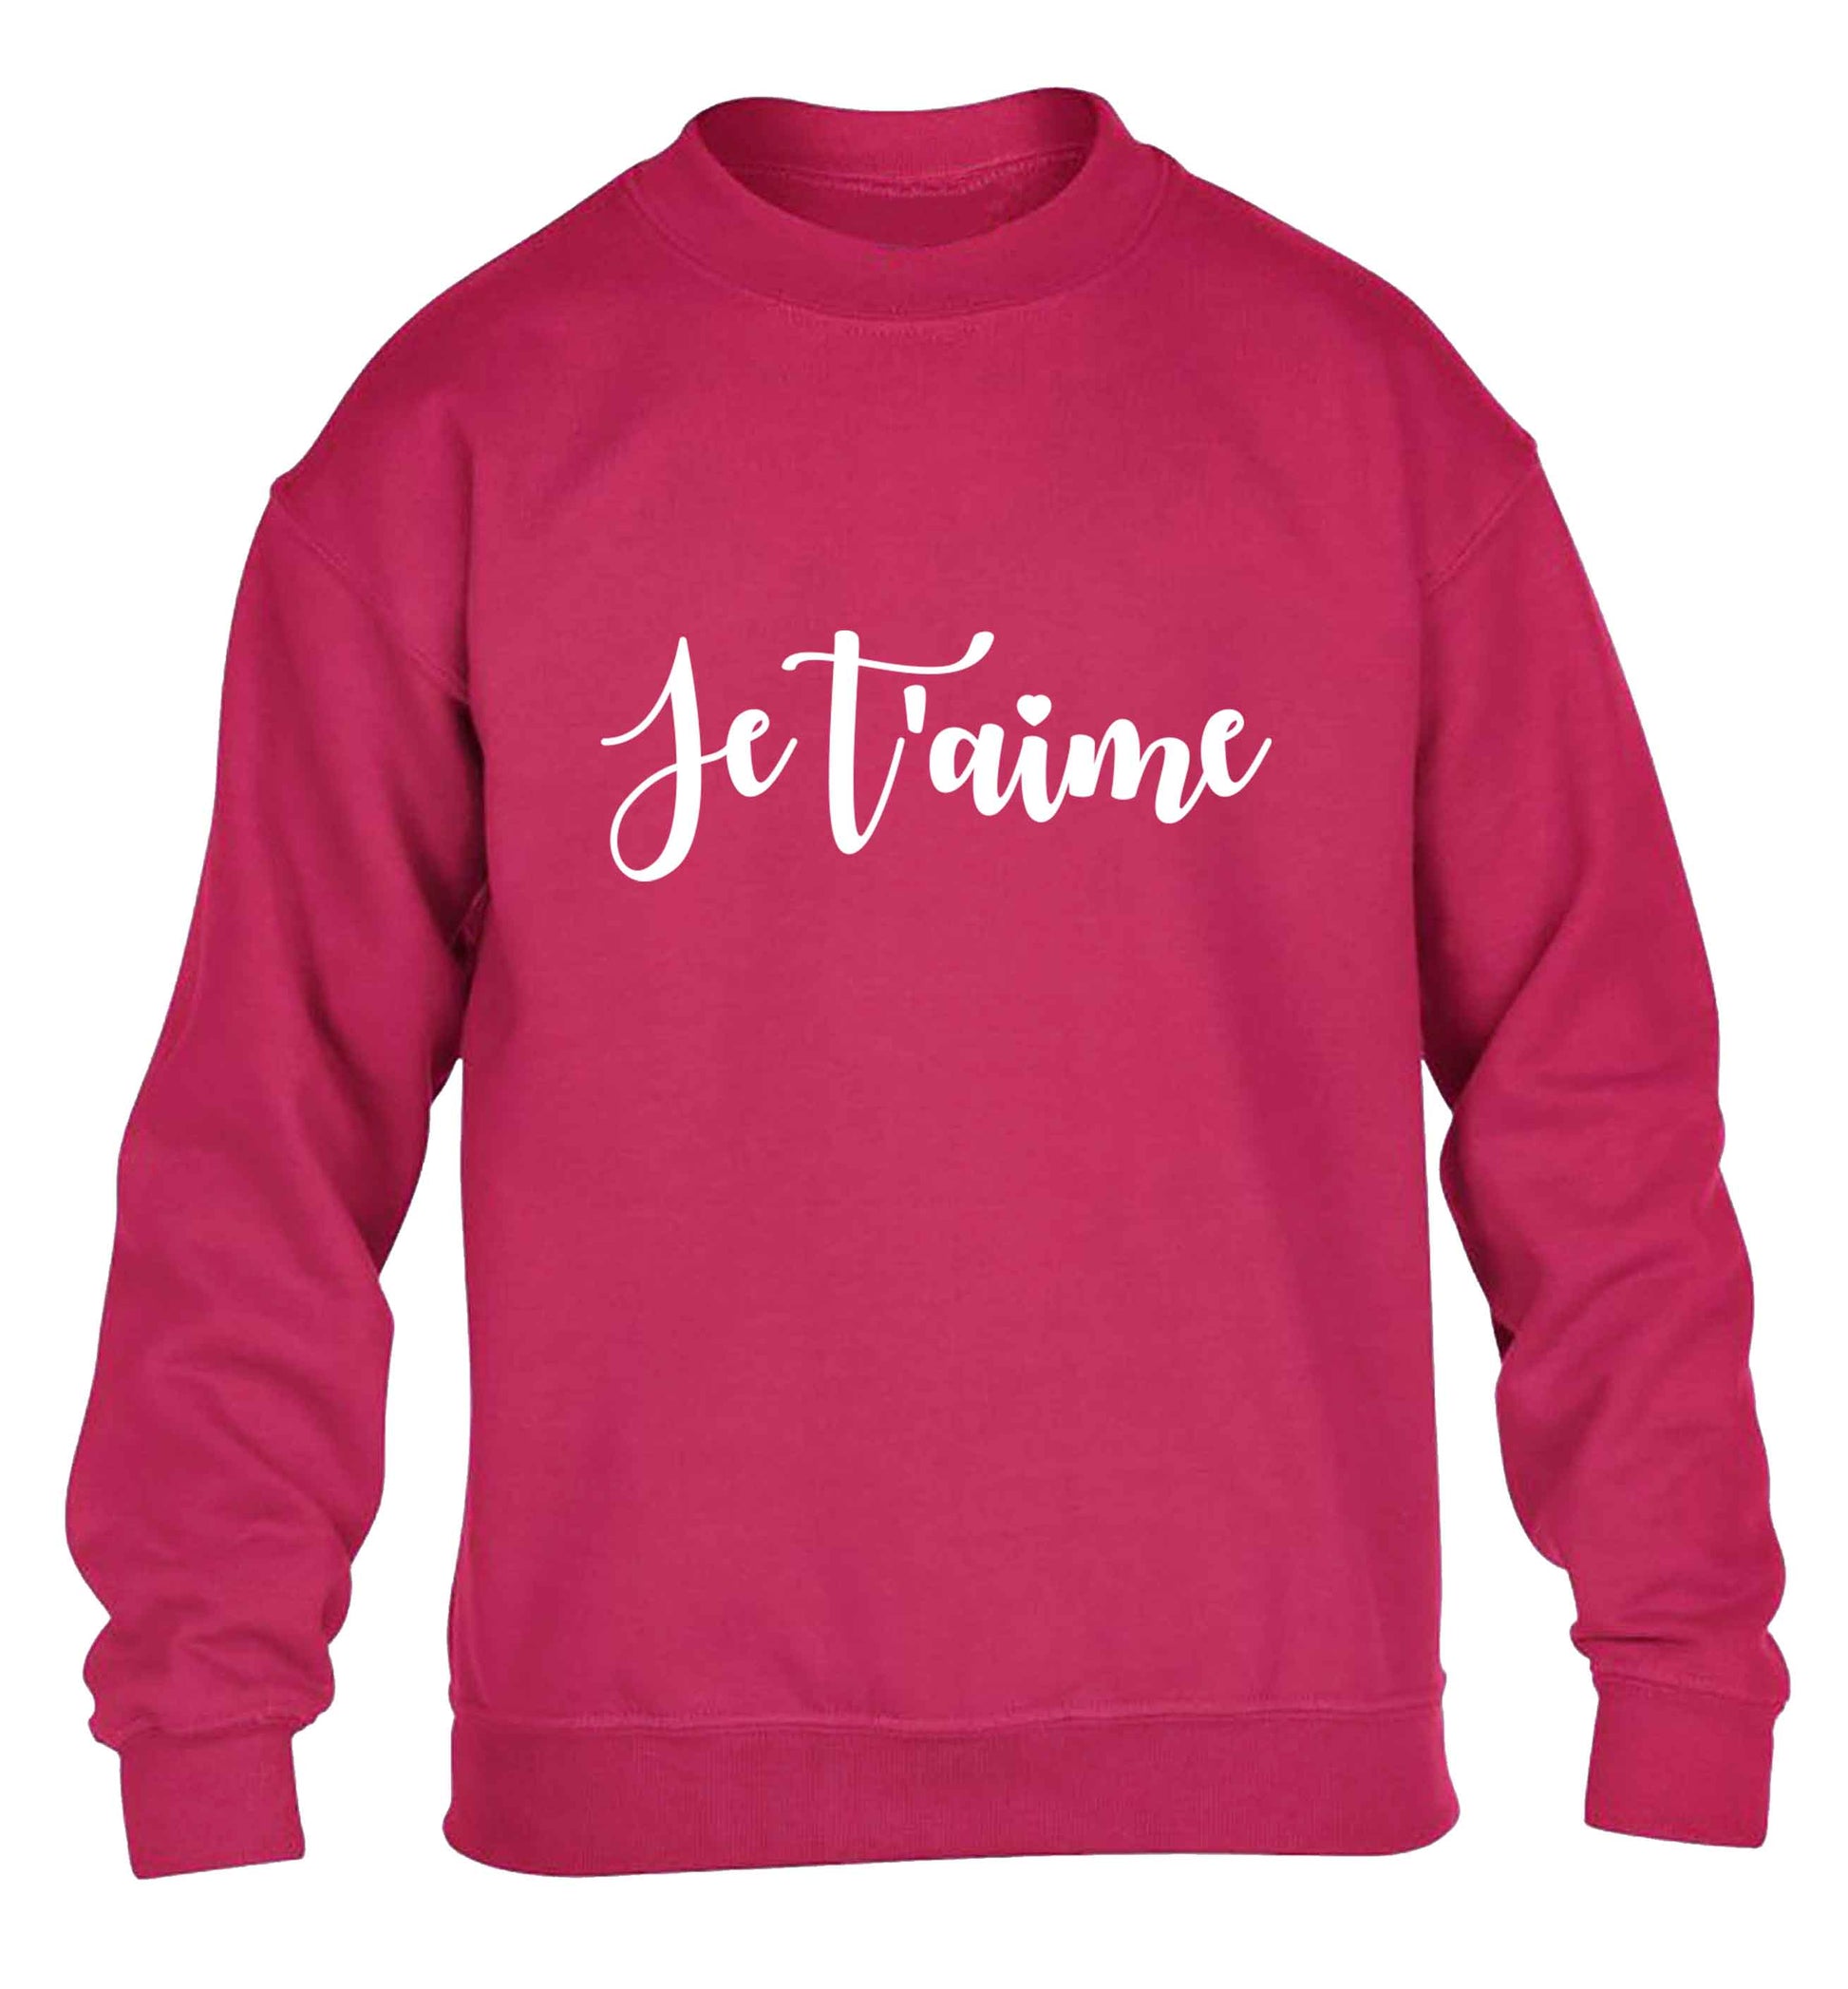 Je t'aime children's pink sweater 12-13 Years